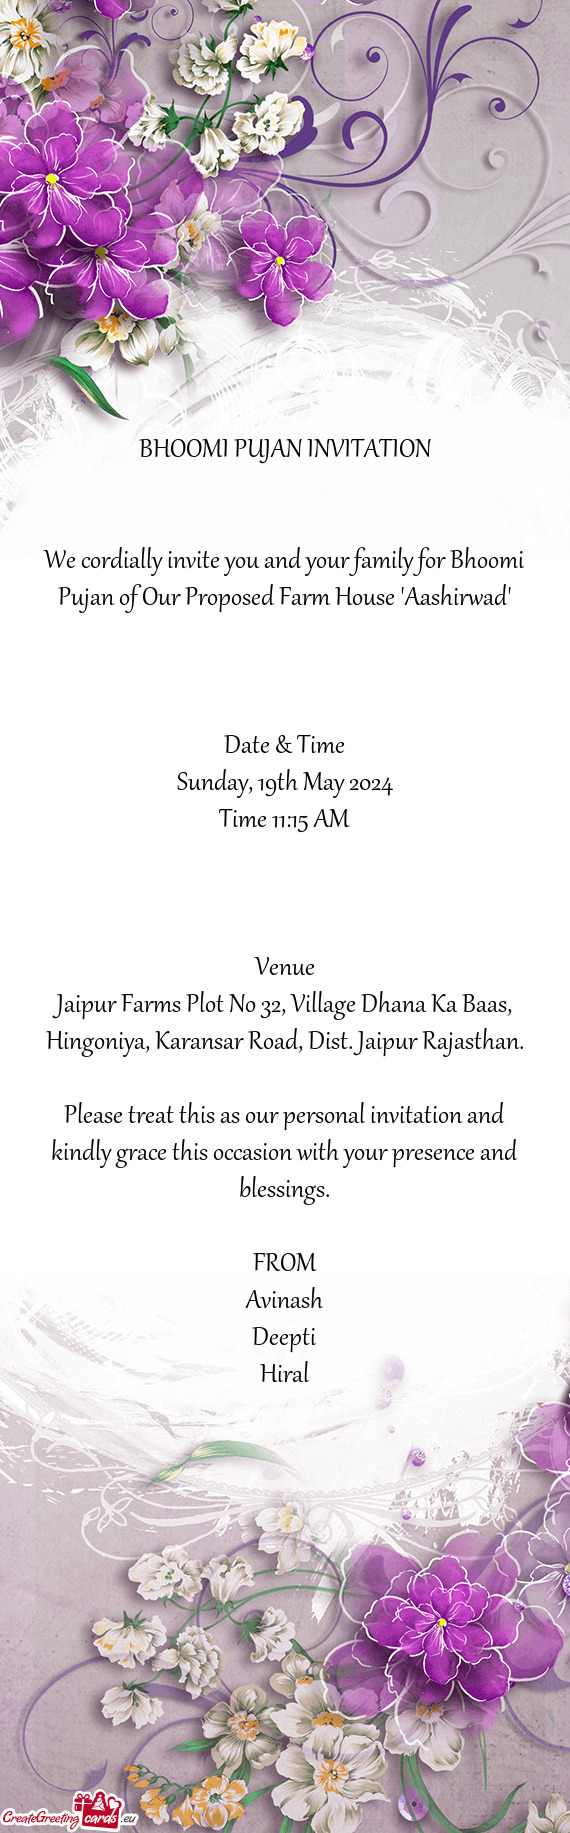 We cordially invite you and your family for Bhoomi Pujan of Our Proposed Farm House "Aashirwad"